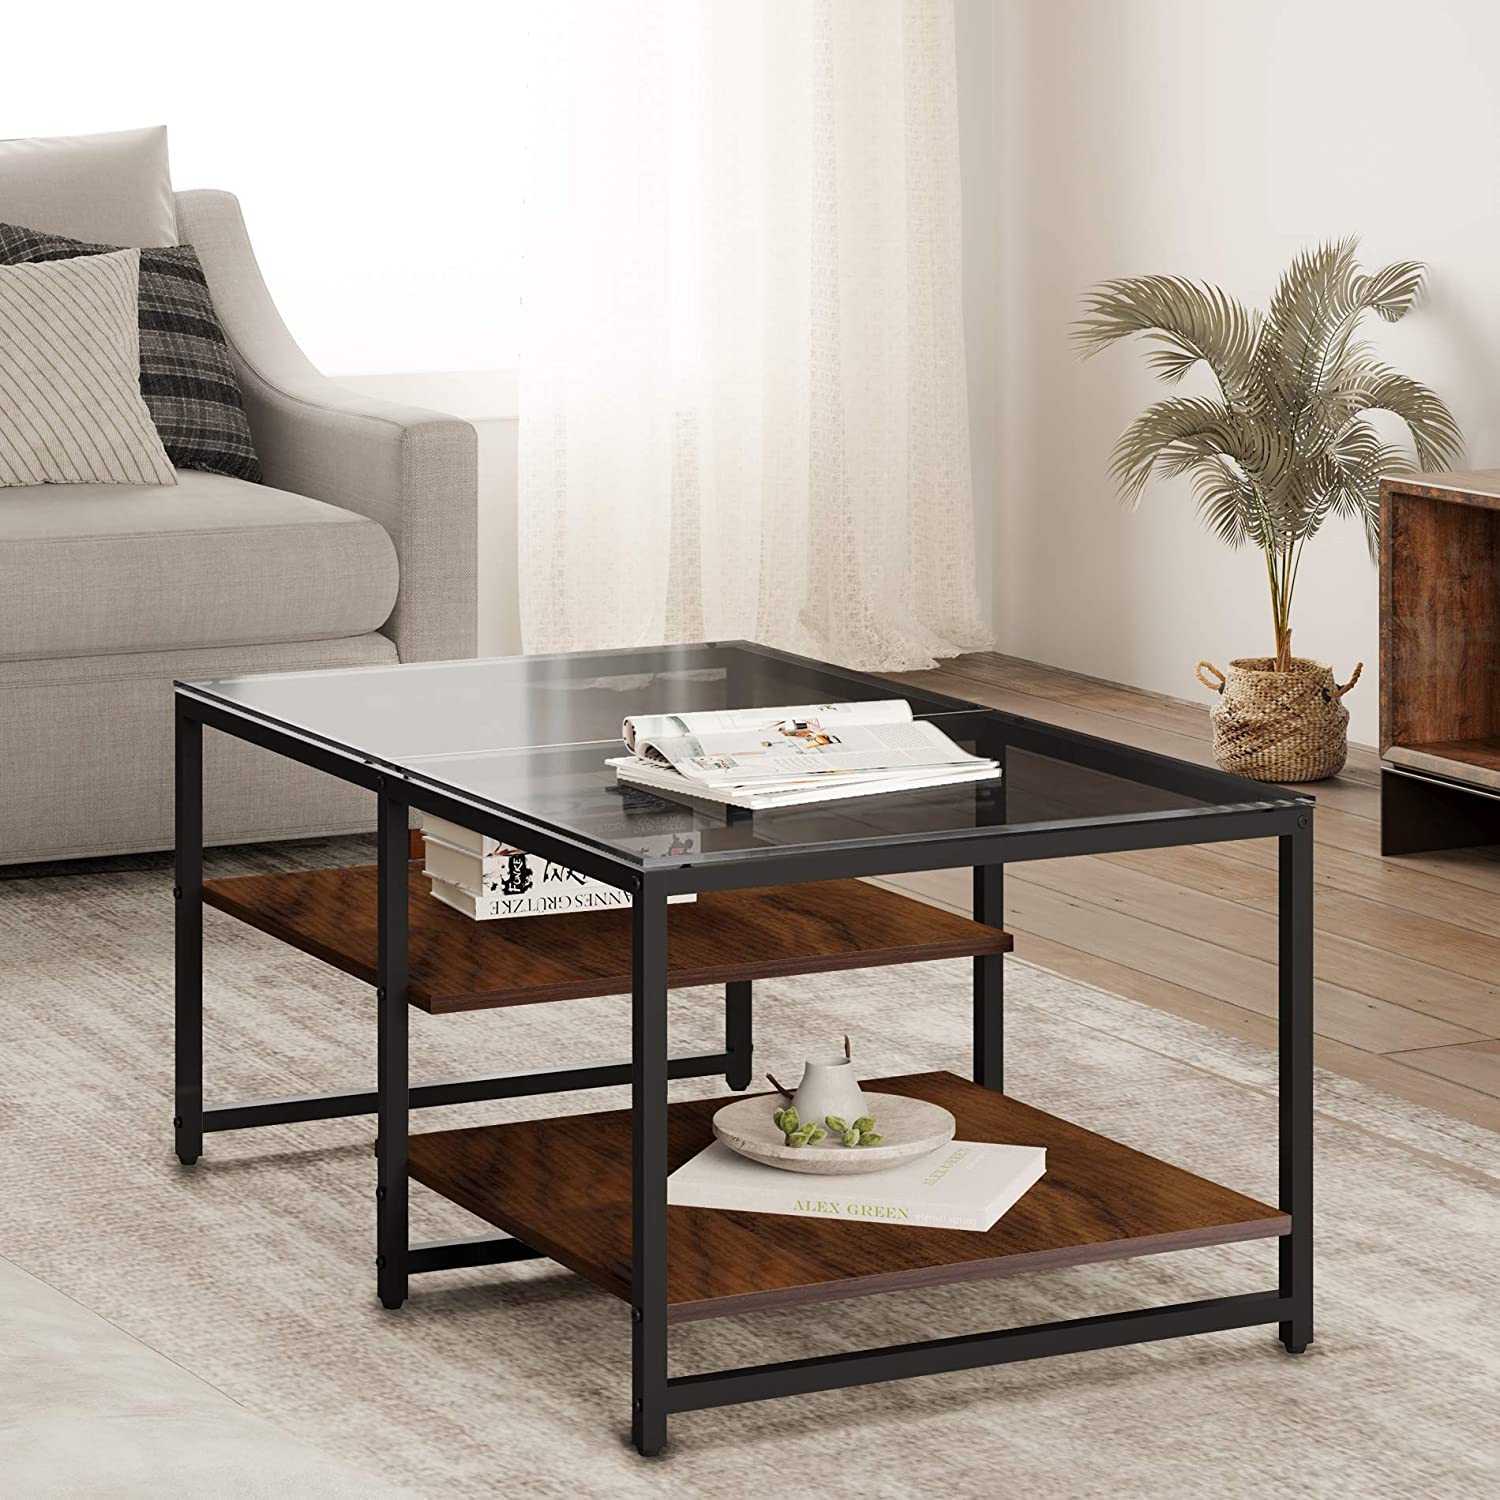 Hot selling good quality living room vintage coffee table designs